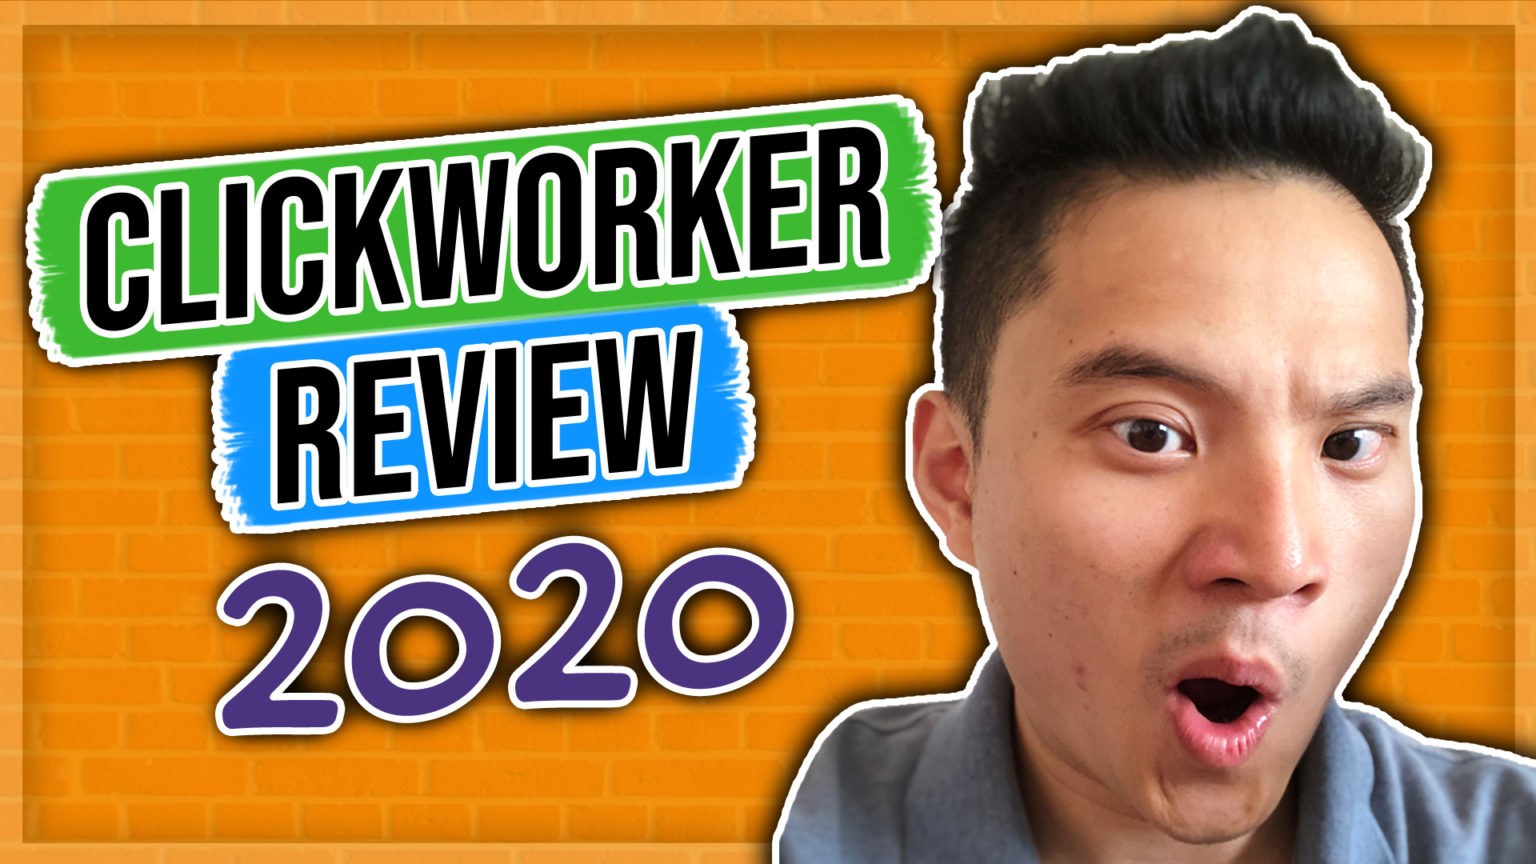 Clickworker Review 2020 (All You Need To Know) FollowMikeWynn